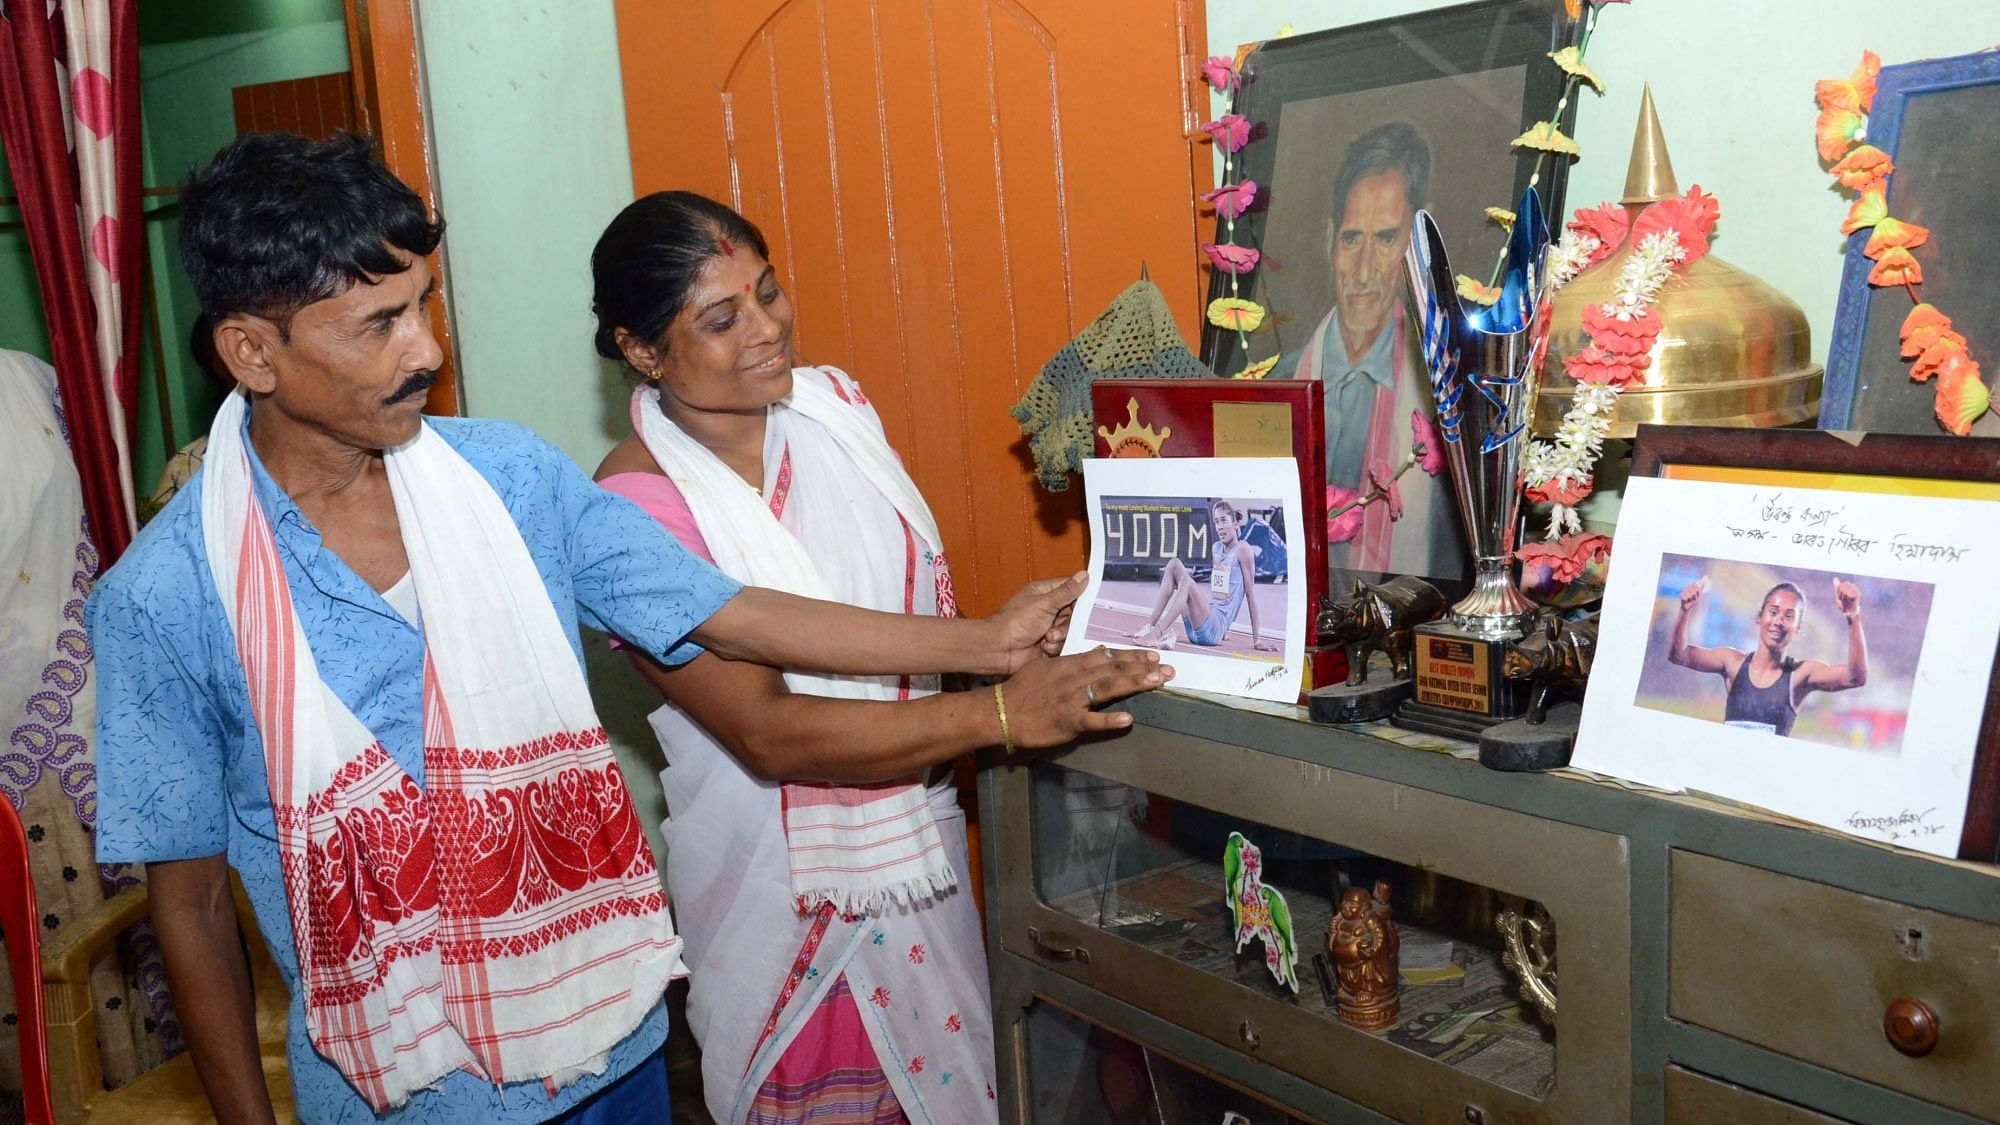 Nagaon: Parents of Hima Das who created history by becoming the first Indian athlete to win a gold at an IAAF event, at their home in Kandhulimari village near Dhing in Assam’s Nagaon district.